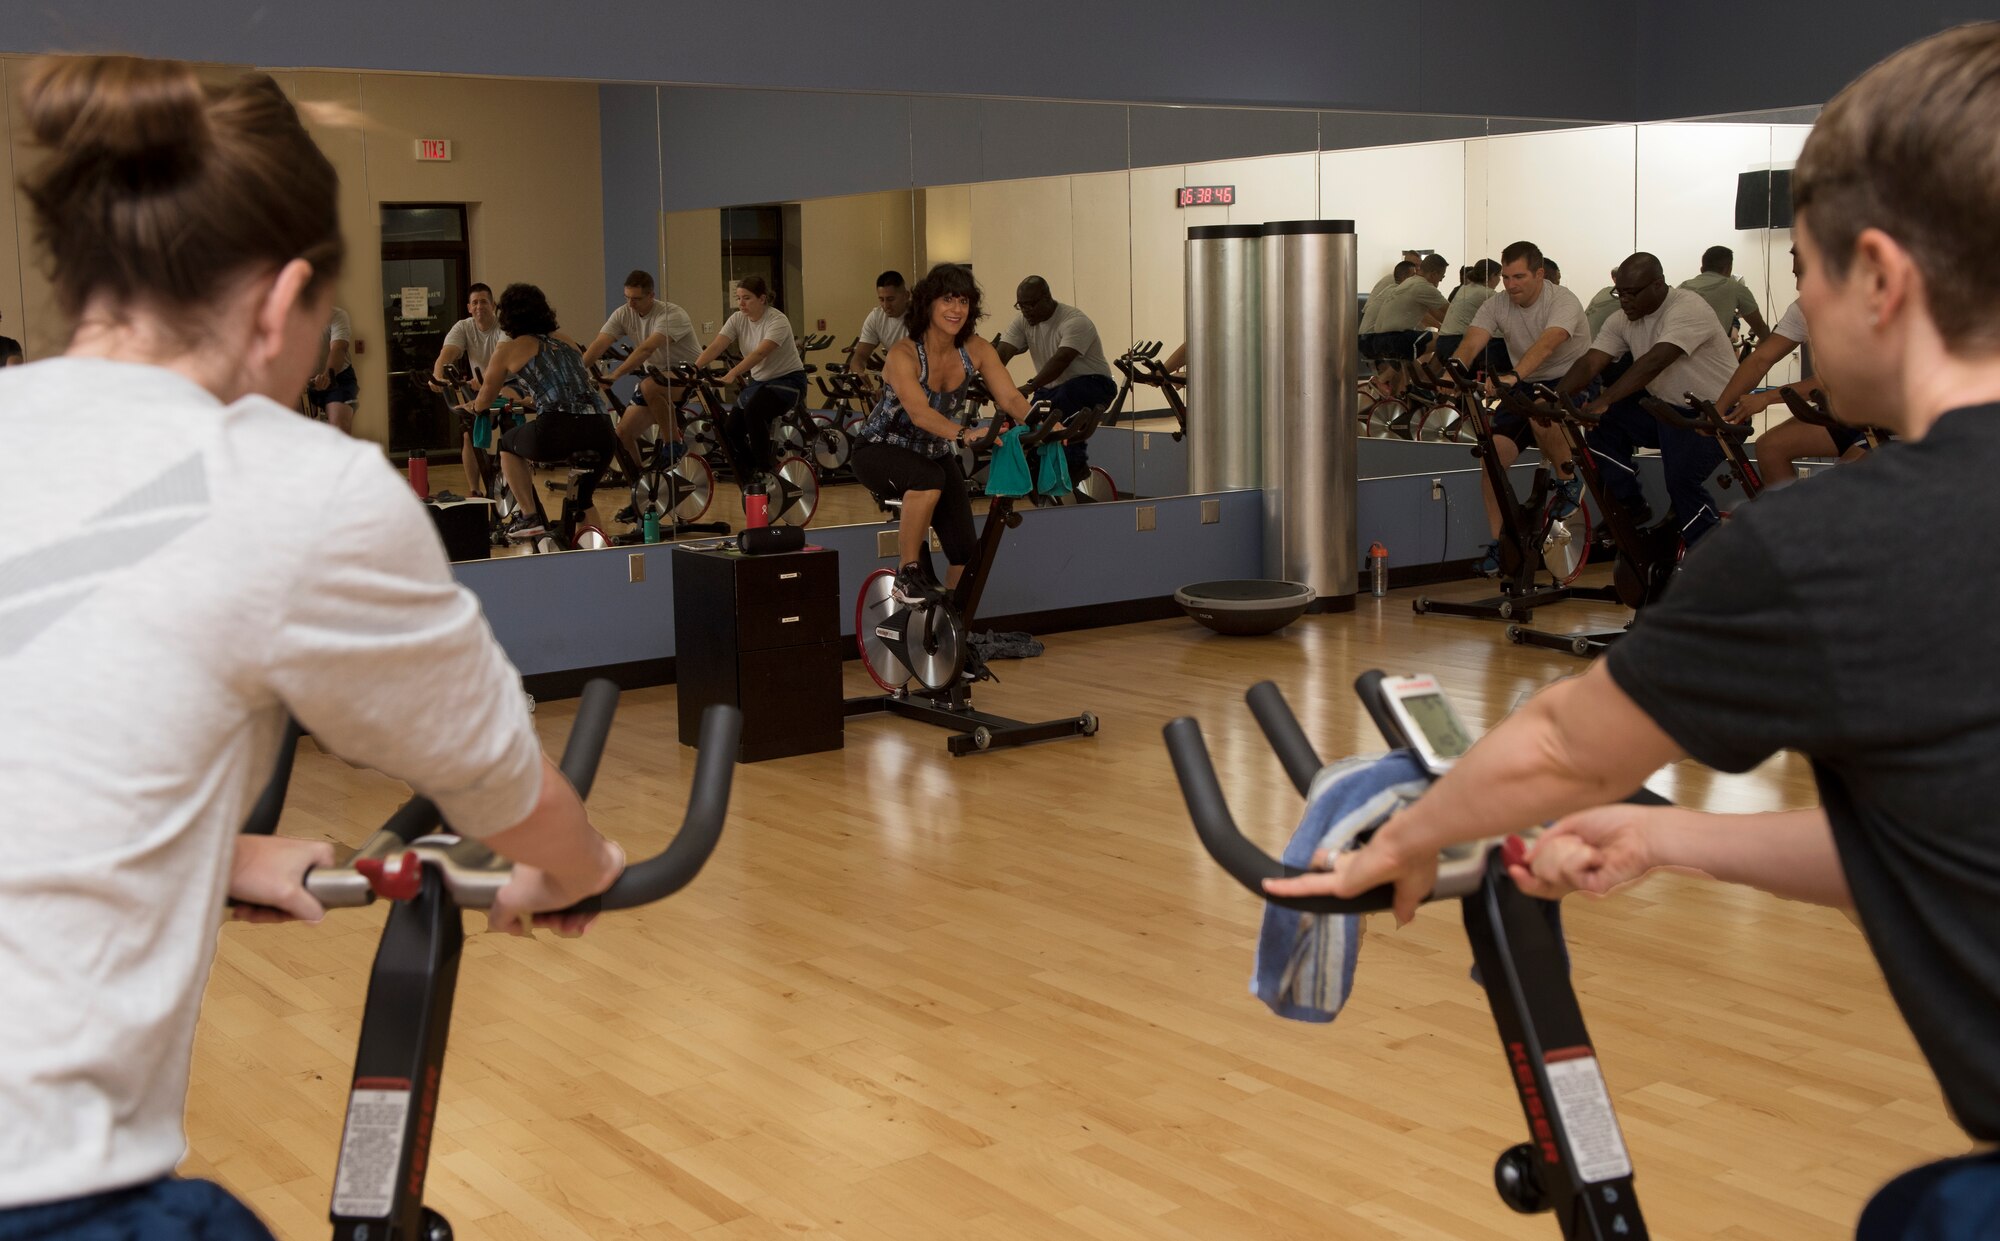 Alicia Ferris-Dannenberg, the health coordinator and registered nurse assigned to the 509th Medical Group, leads Airmen in a cycling class on October 10, 2019, at Whiteman Air Force Base, Missouri. The class served as part of the Health and Readiness Optimization (HeRO) strategy, an initiative newly adopted by the Air Force to address targets for health improvements in areas such as physical activity, nutrition, sleep and nicotine cessation. (U.S. Air Force photo by Staff Sgt. Kayla White)